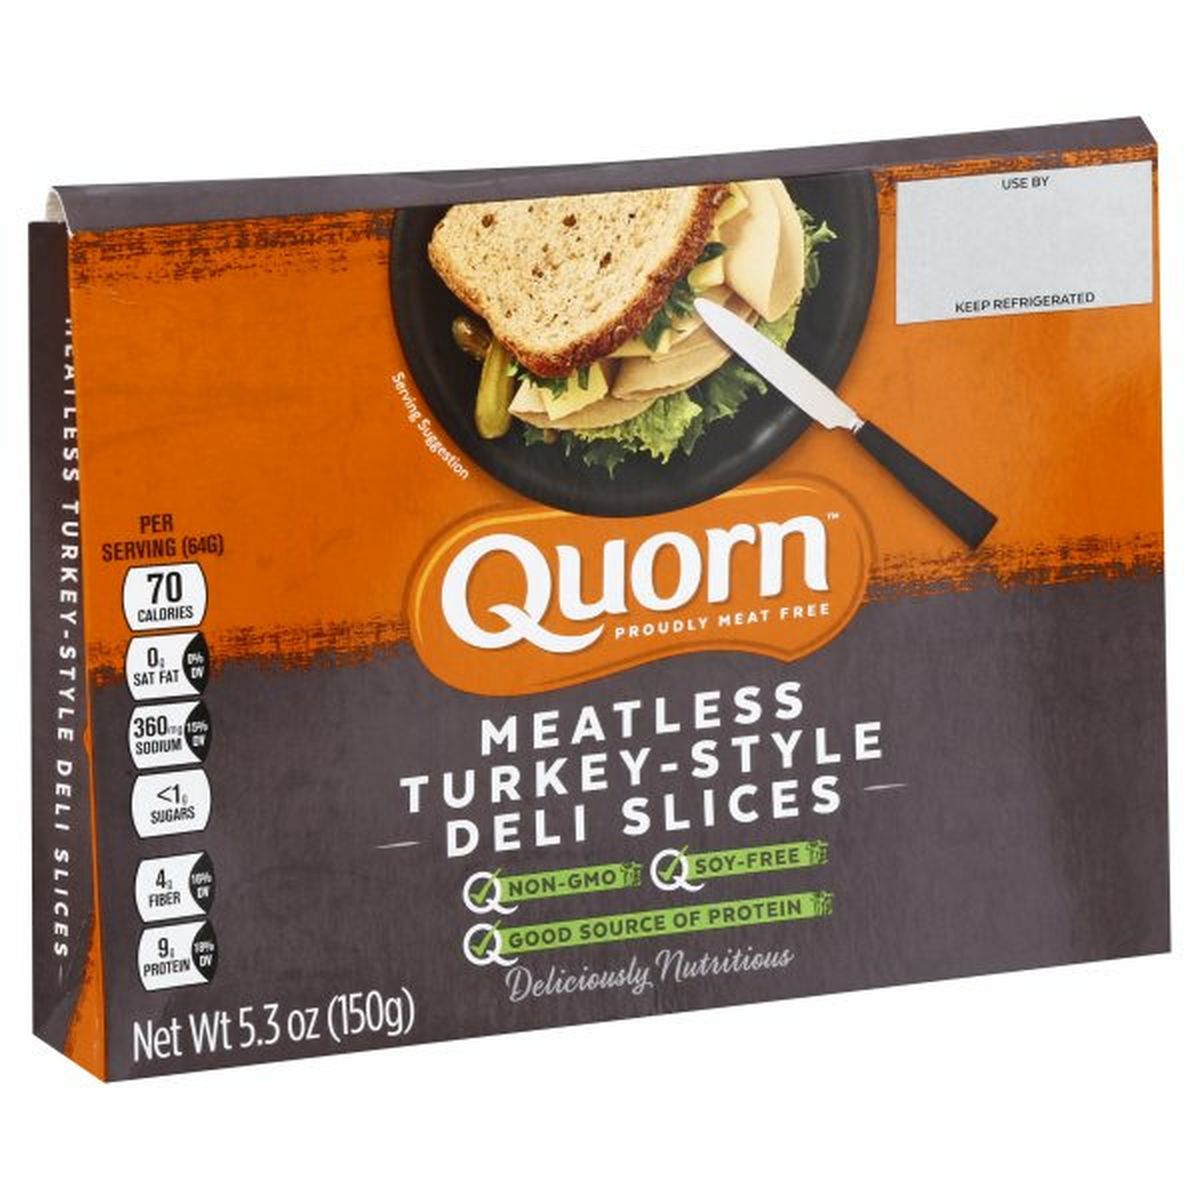 Calories in Quorn Deli Slices, Turkey - Style, Meatless